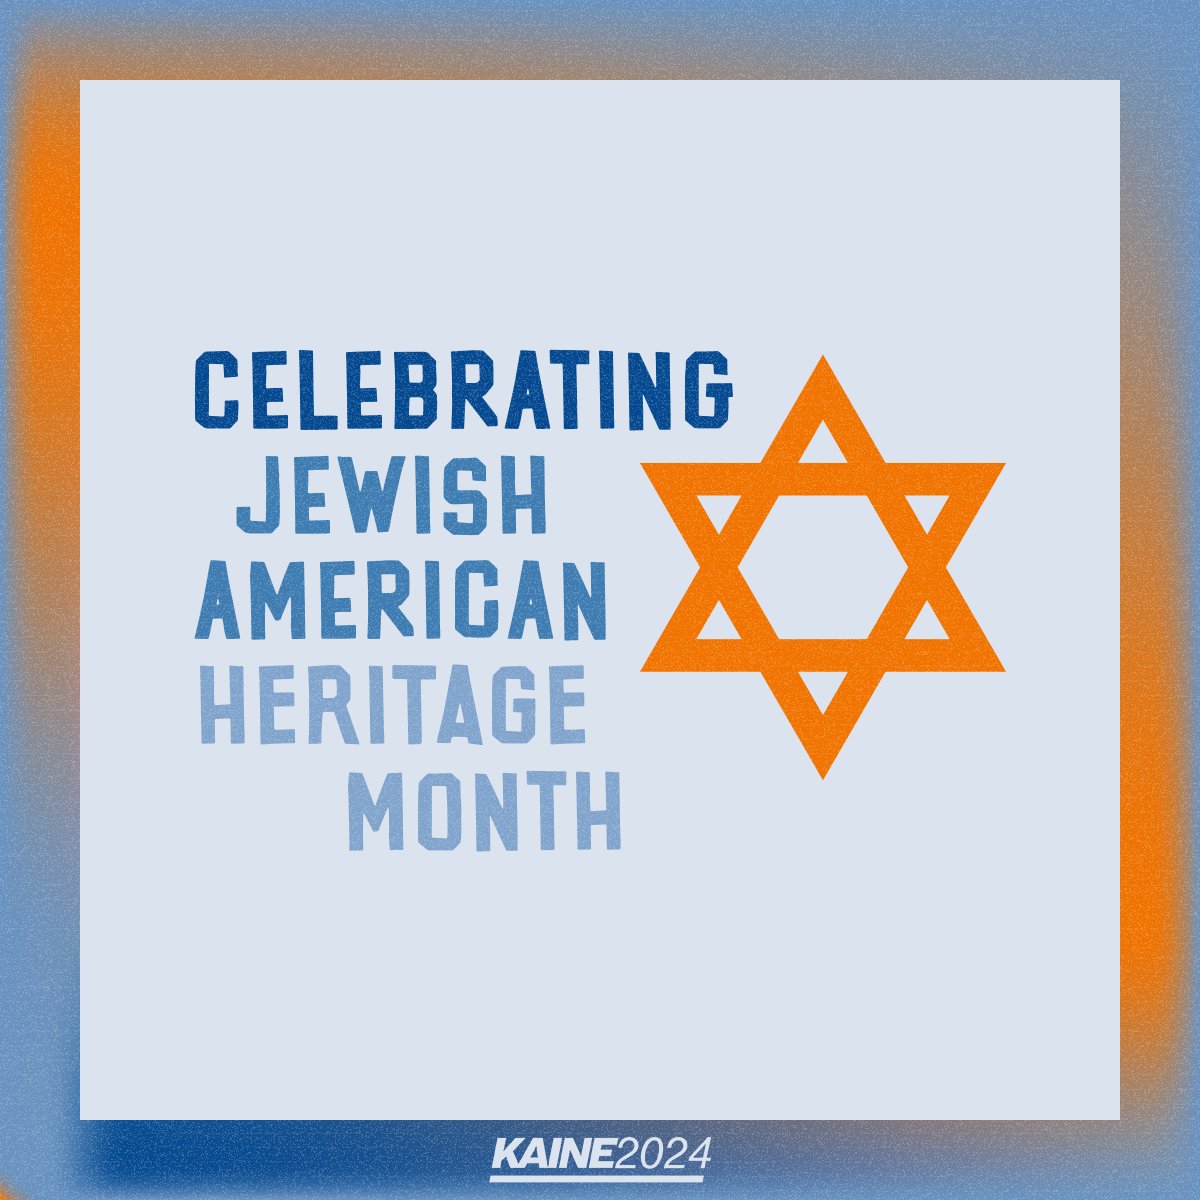 During #JewishAmericanHeritageMonth, we celebrate the many contributions of Jewish Americans in Virginia and across the country. But we must also recognize the alarming rise of antisemitism we’re seeing—and the deep pain it is causing so many. We must put an end to it.